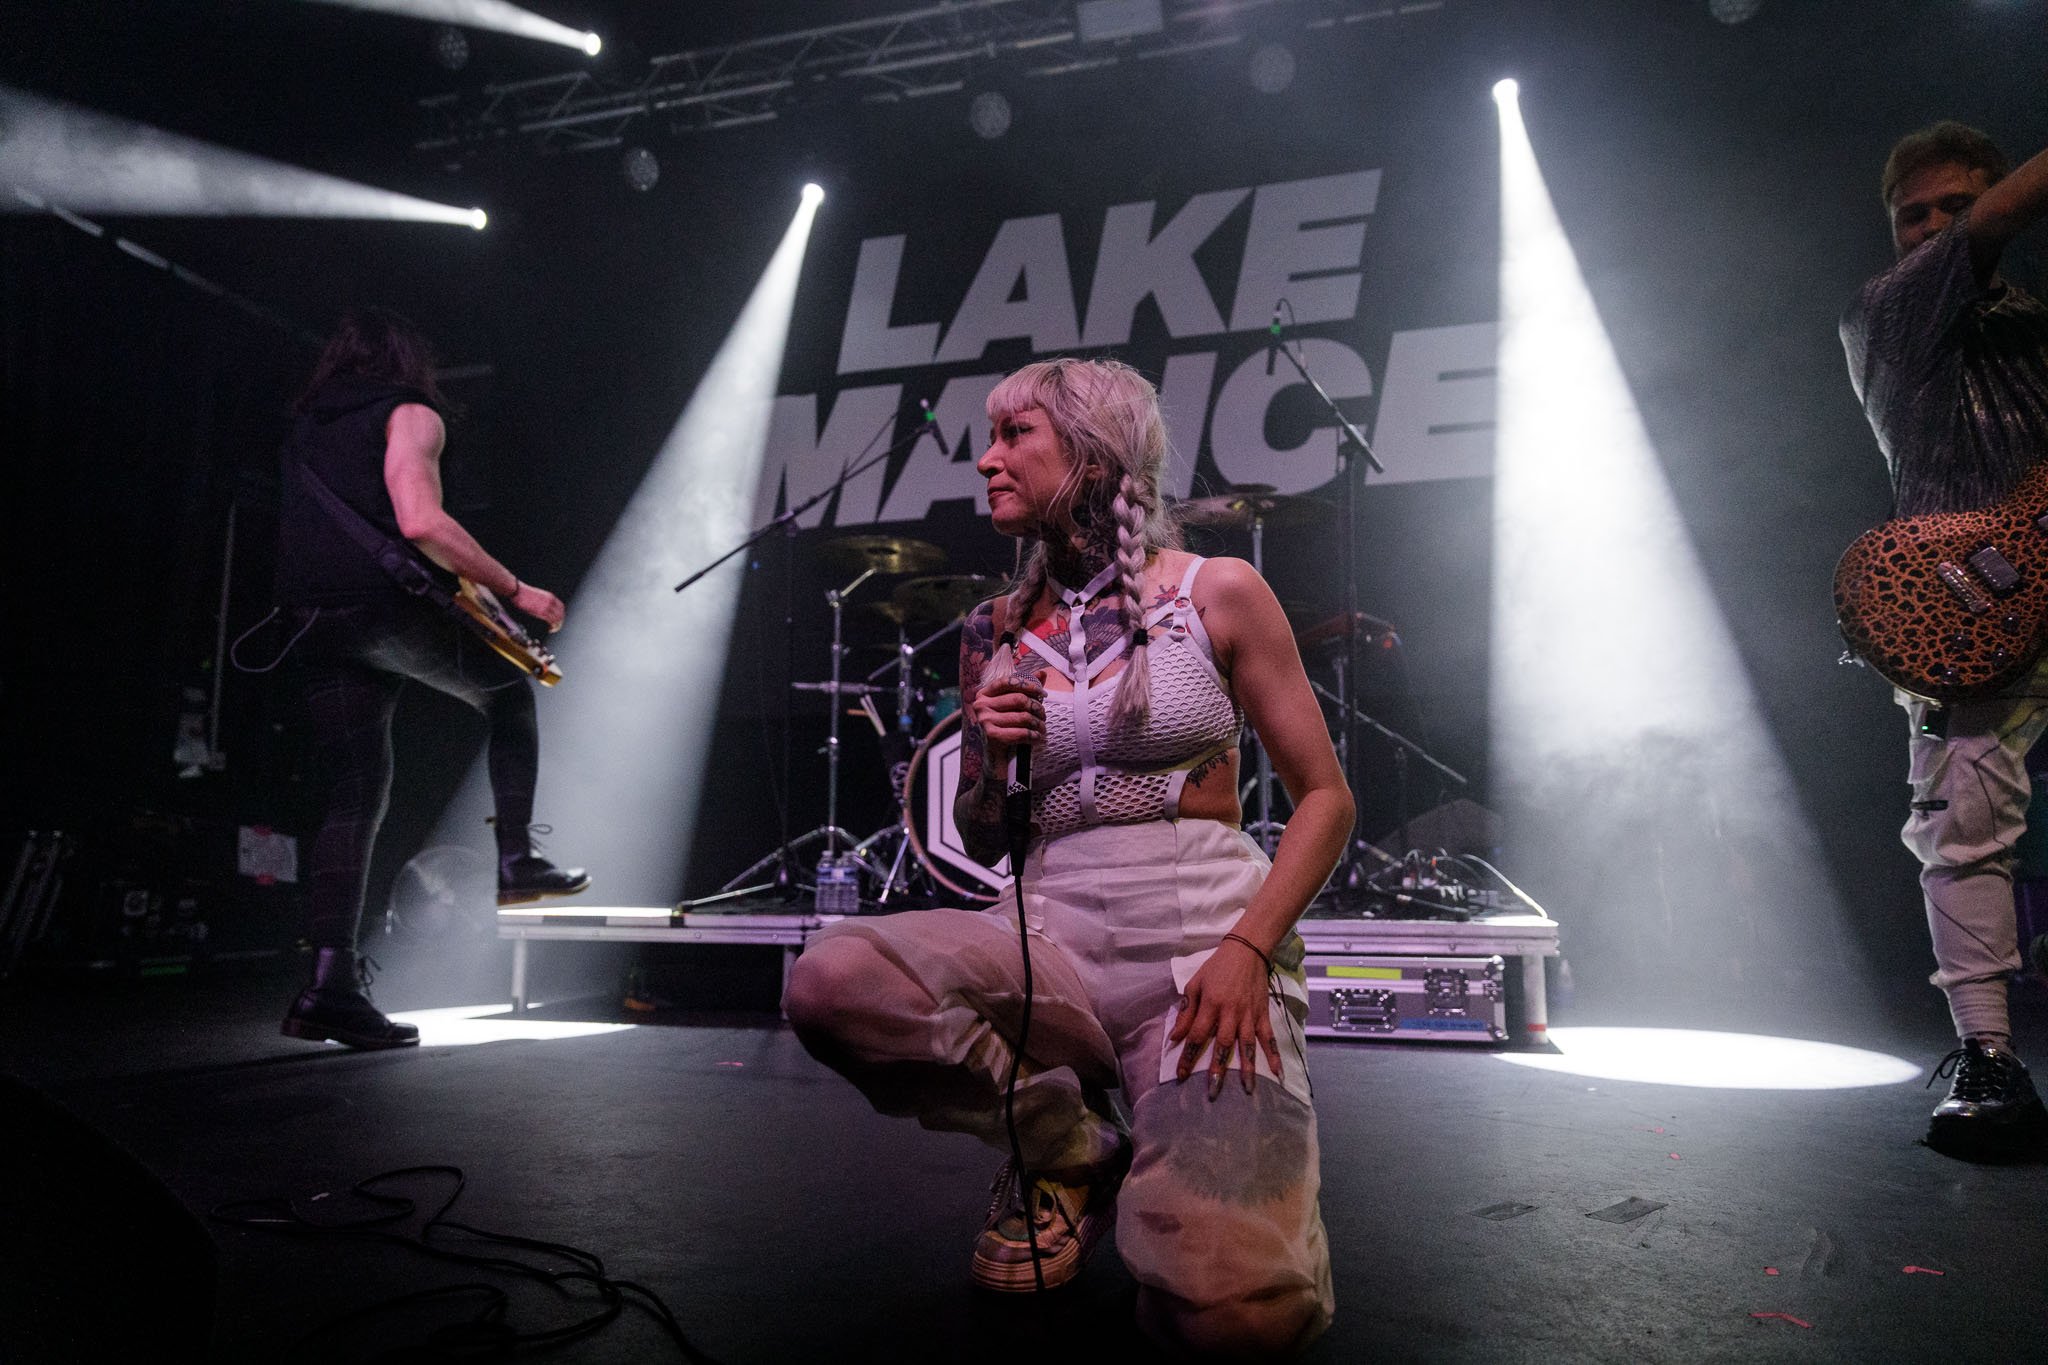 Lake Malice at the Academy 2 in Manchester on March 28th 2023 ©